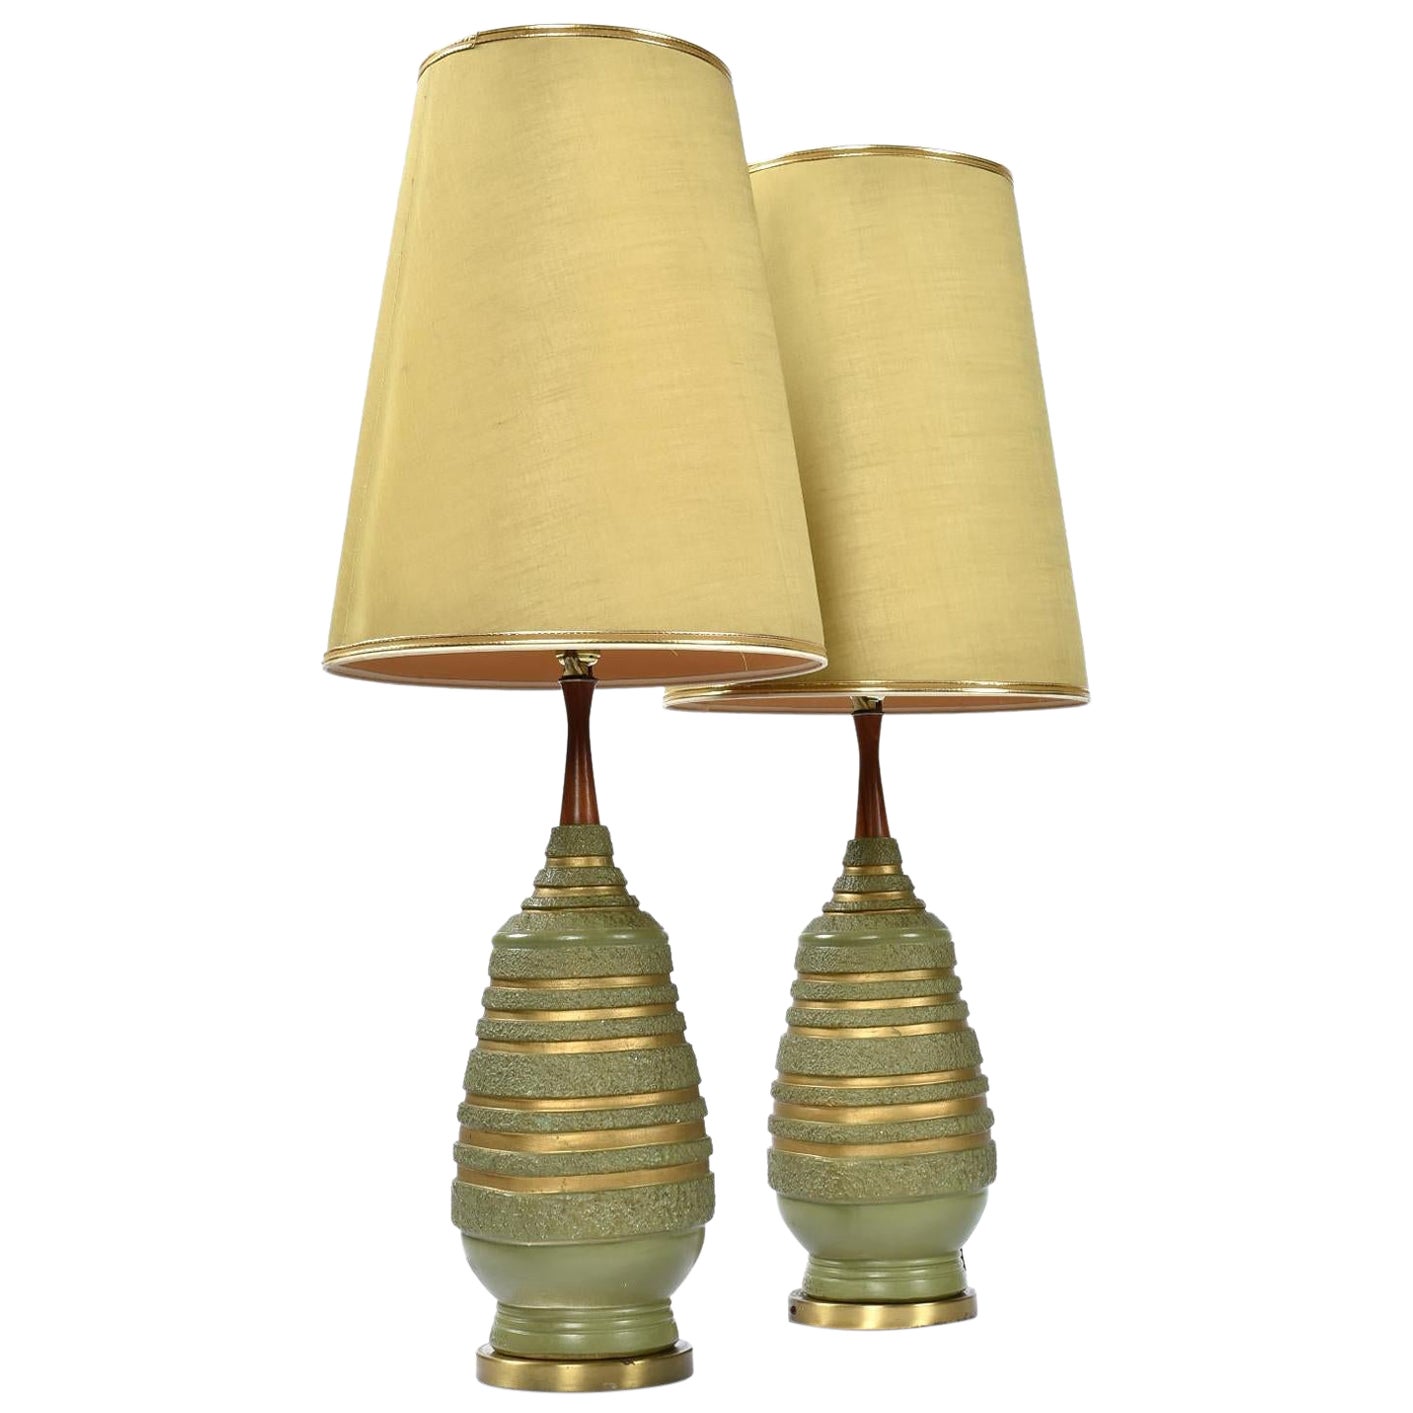 Incredible complete pair of Mid-Century Modern avacado green lamps by Plasto. These have got to be some of the most authentic Mid-Century lamps around. It is quite rare to find lamps with their original shades. These green, conical shades are